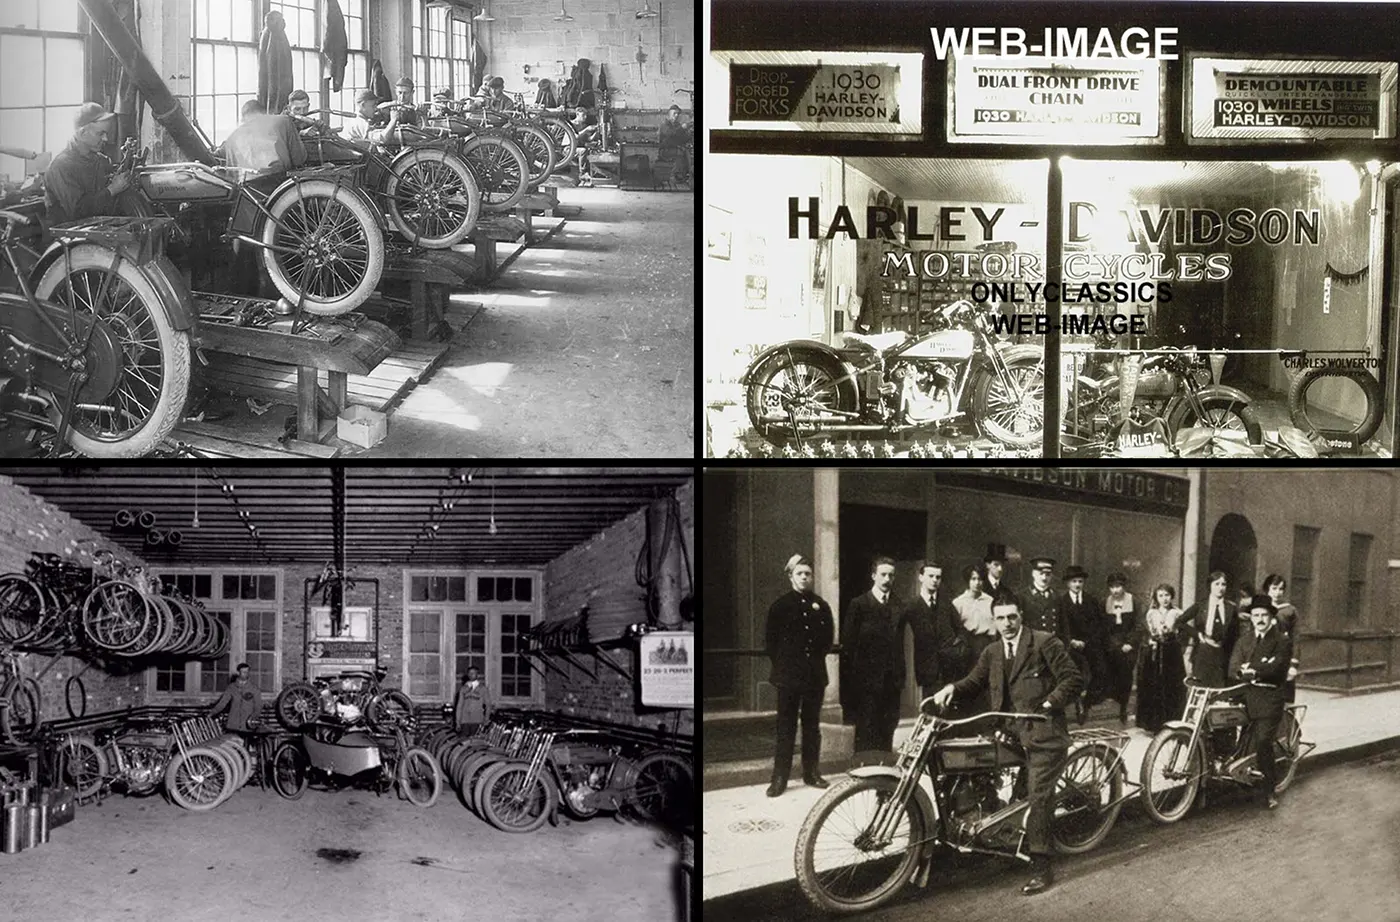 Vintage Photos of Harley-Davidson Motorcycles and Factory From